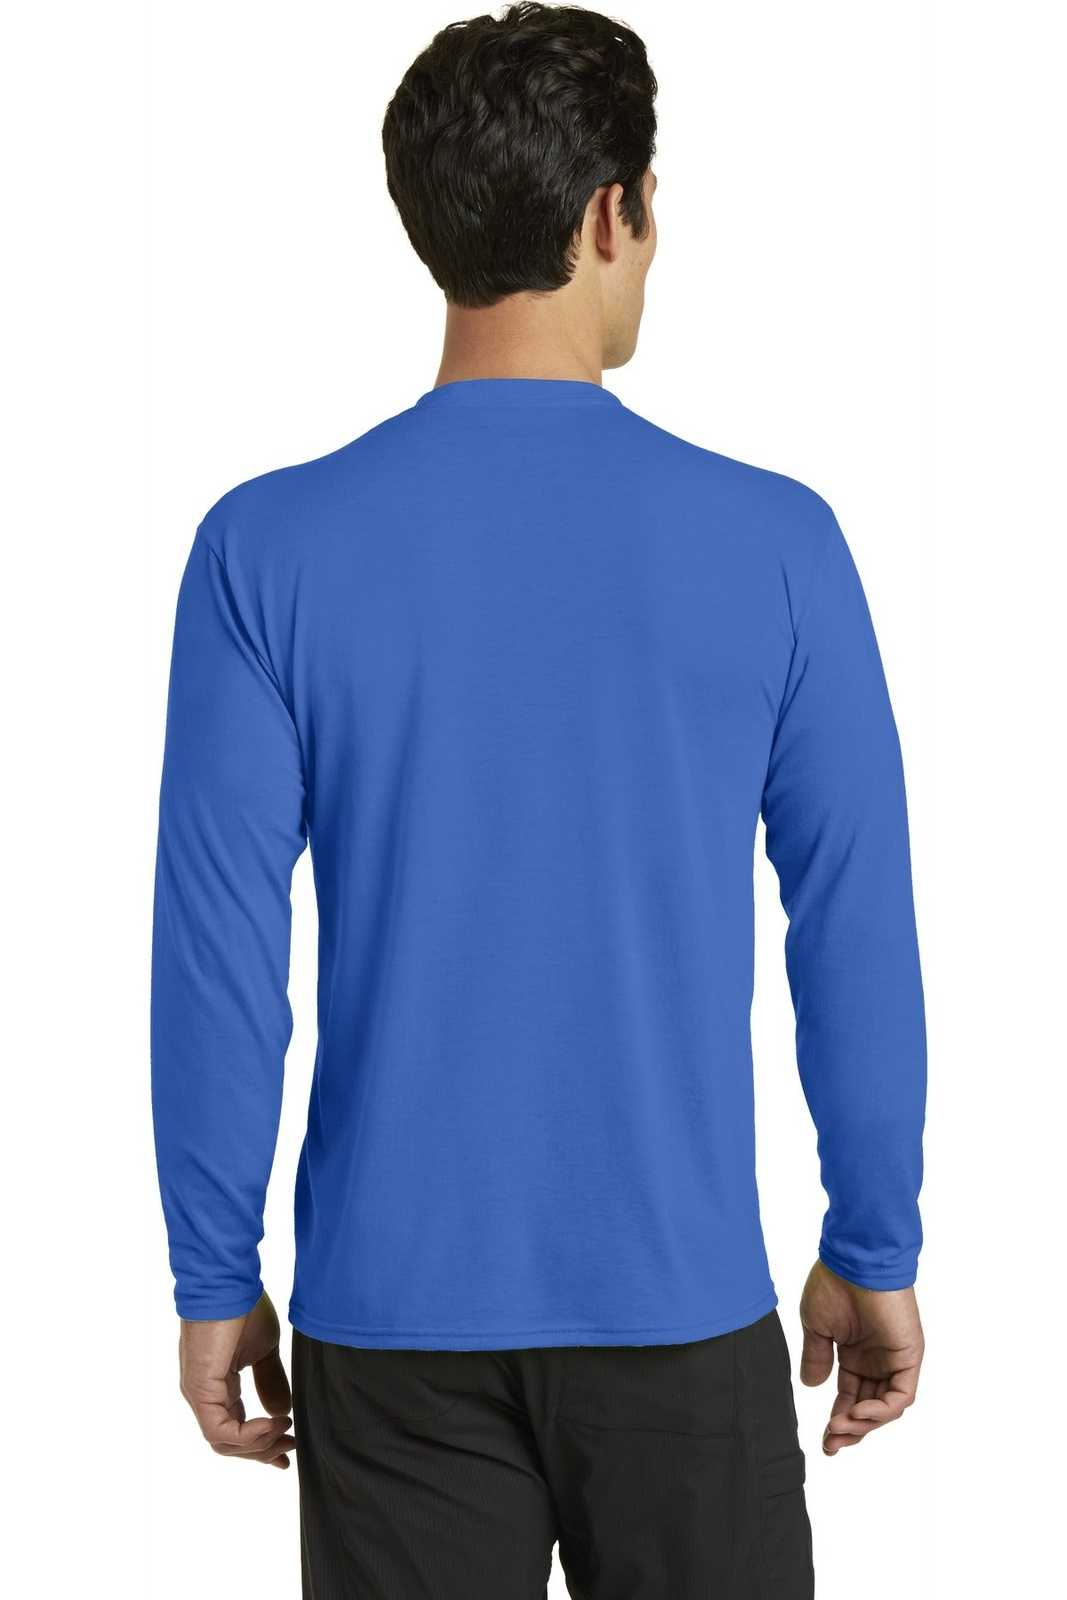 Port &amp; Company PC381LS Long Sleeve Performance Blend Tee - True Royal - HIT a Double - 2